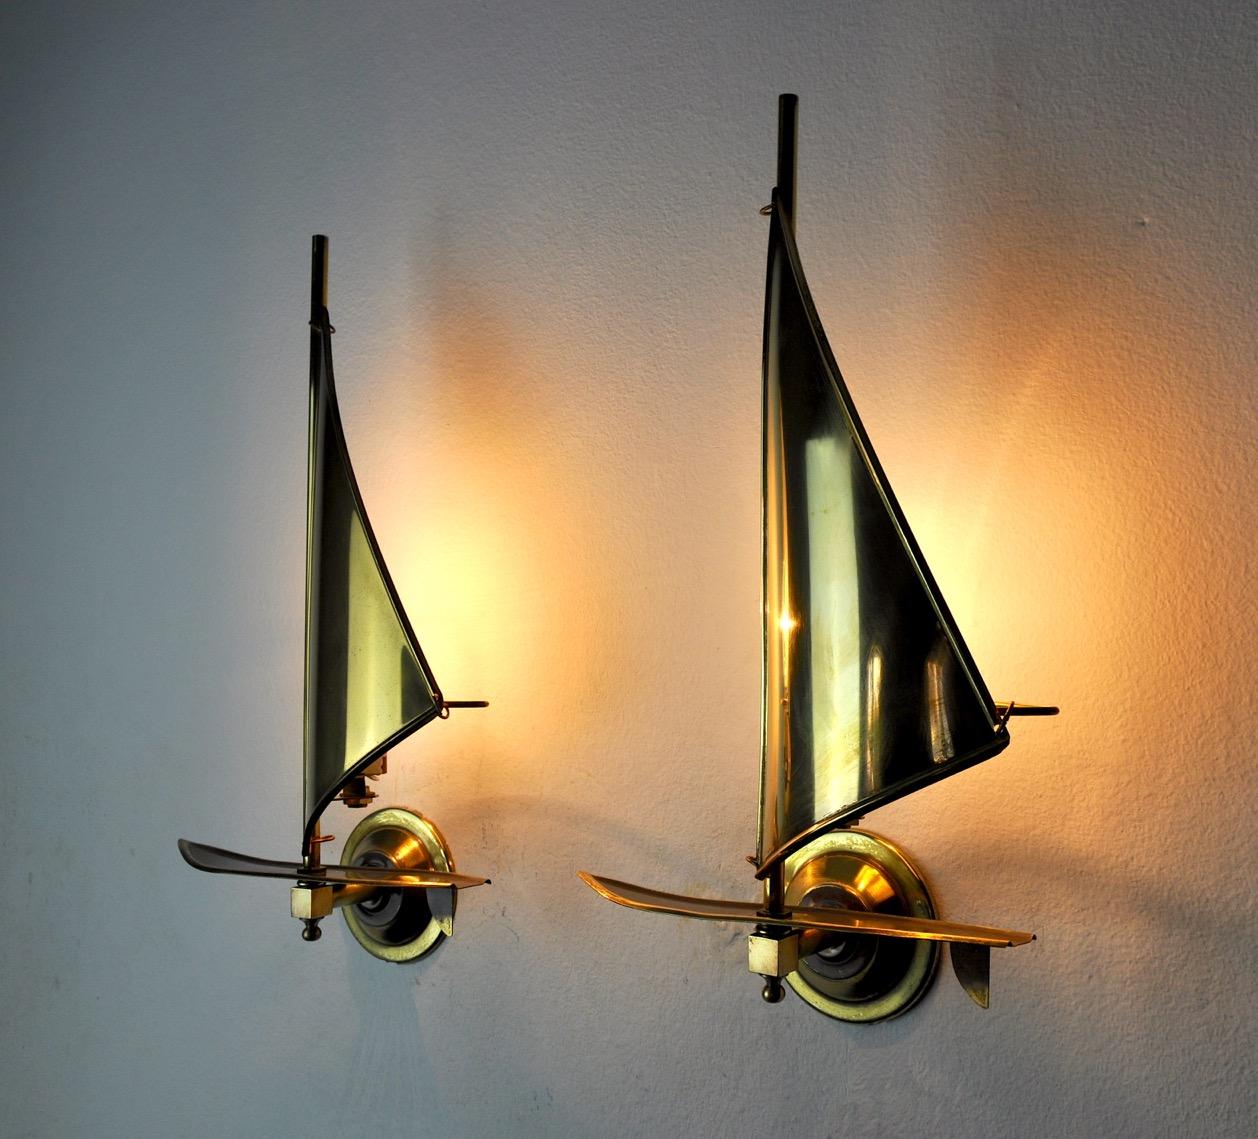 Mid-20th Century Pair of Brass Sailboat Sconces, Midcentury, Italy, 1950s